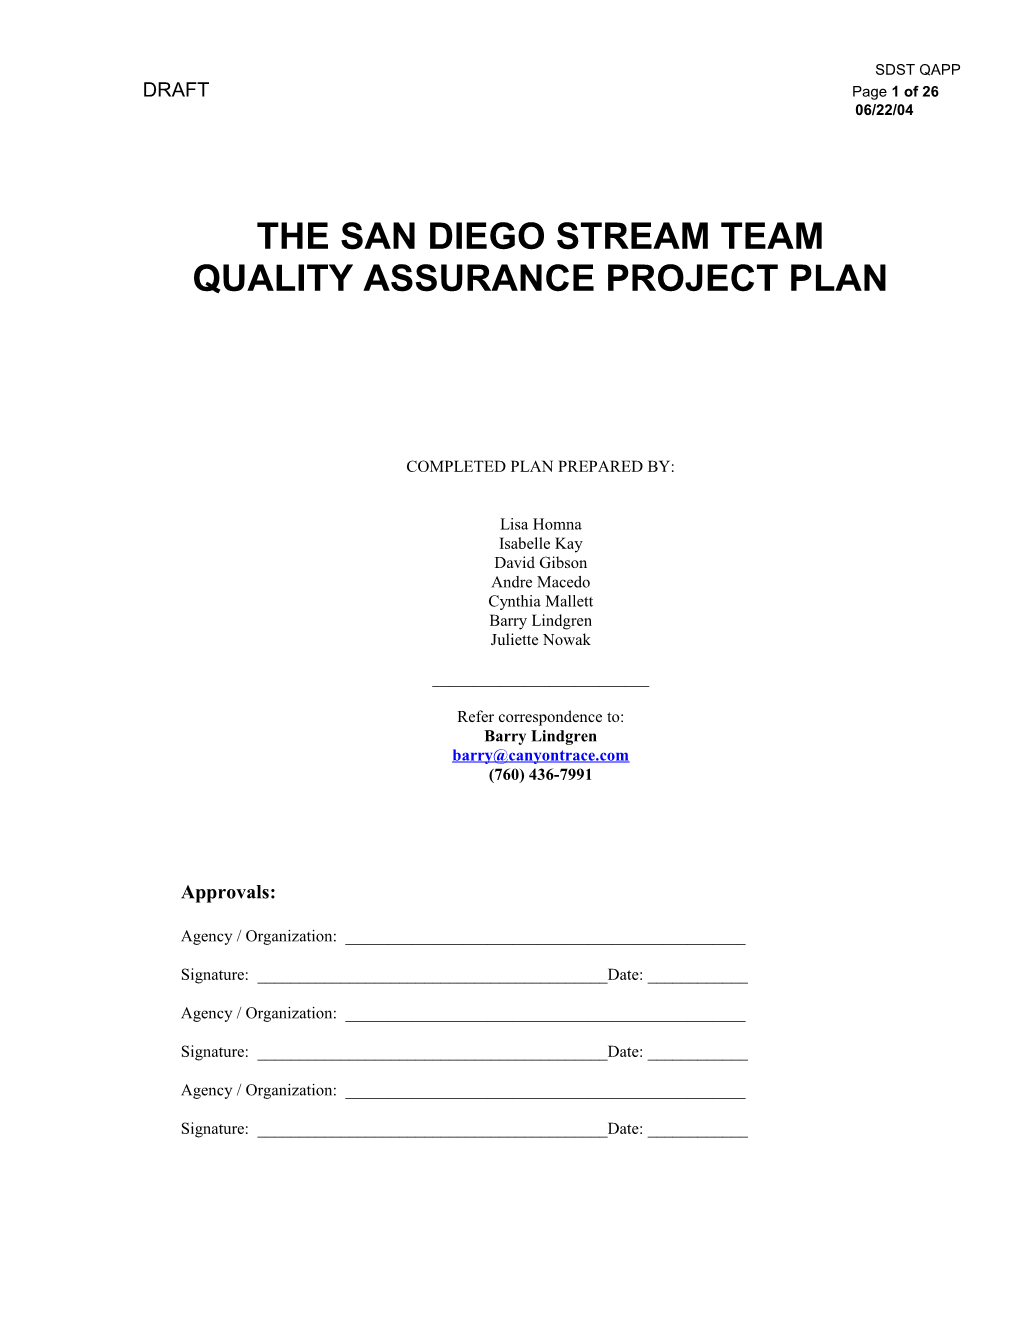 The San Diego Stream Team Quality Assurance Project Plan